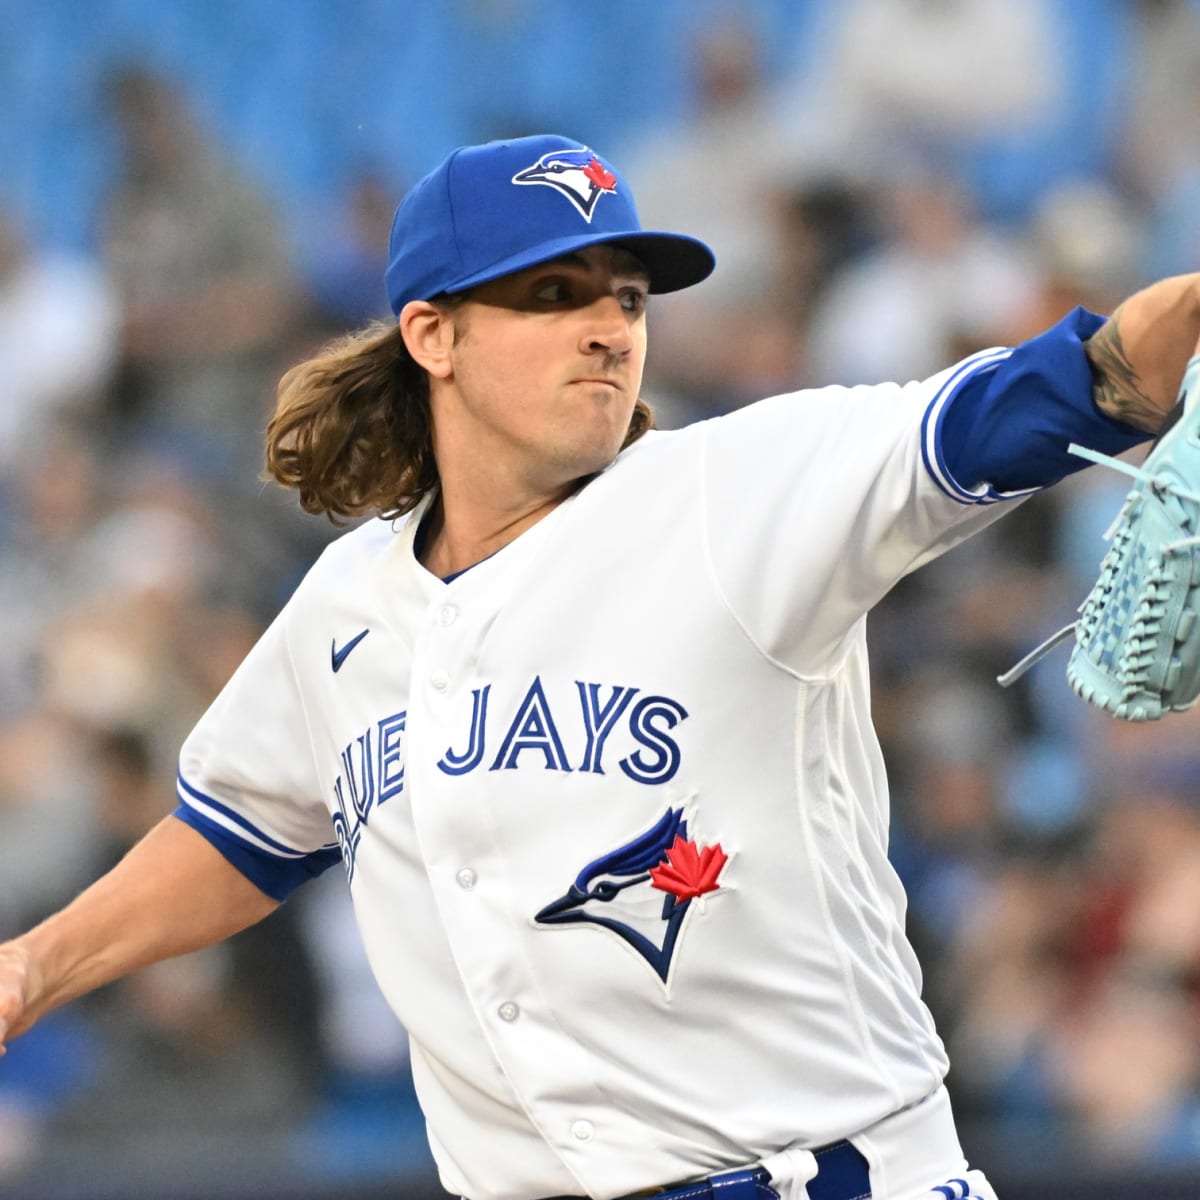 Blue Jays send Gausman to mound, aiming to avoid Twins sweep